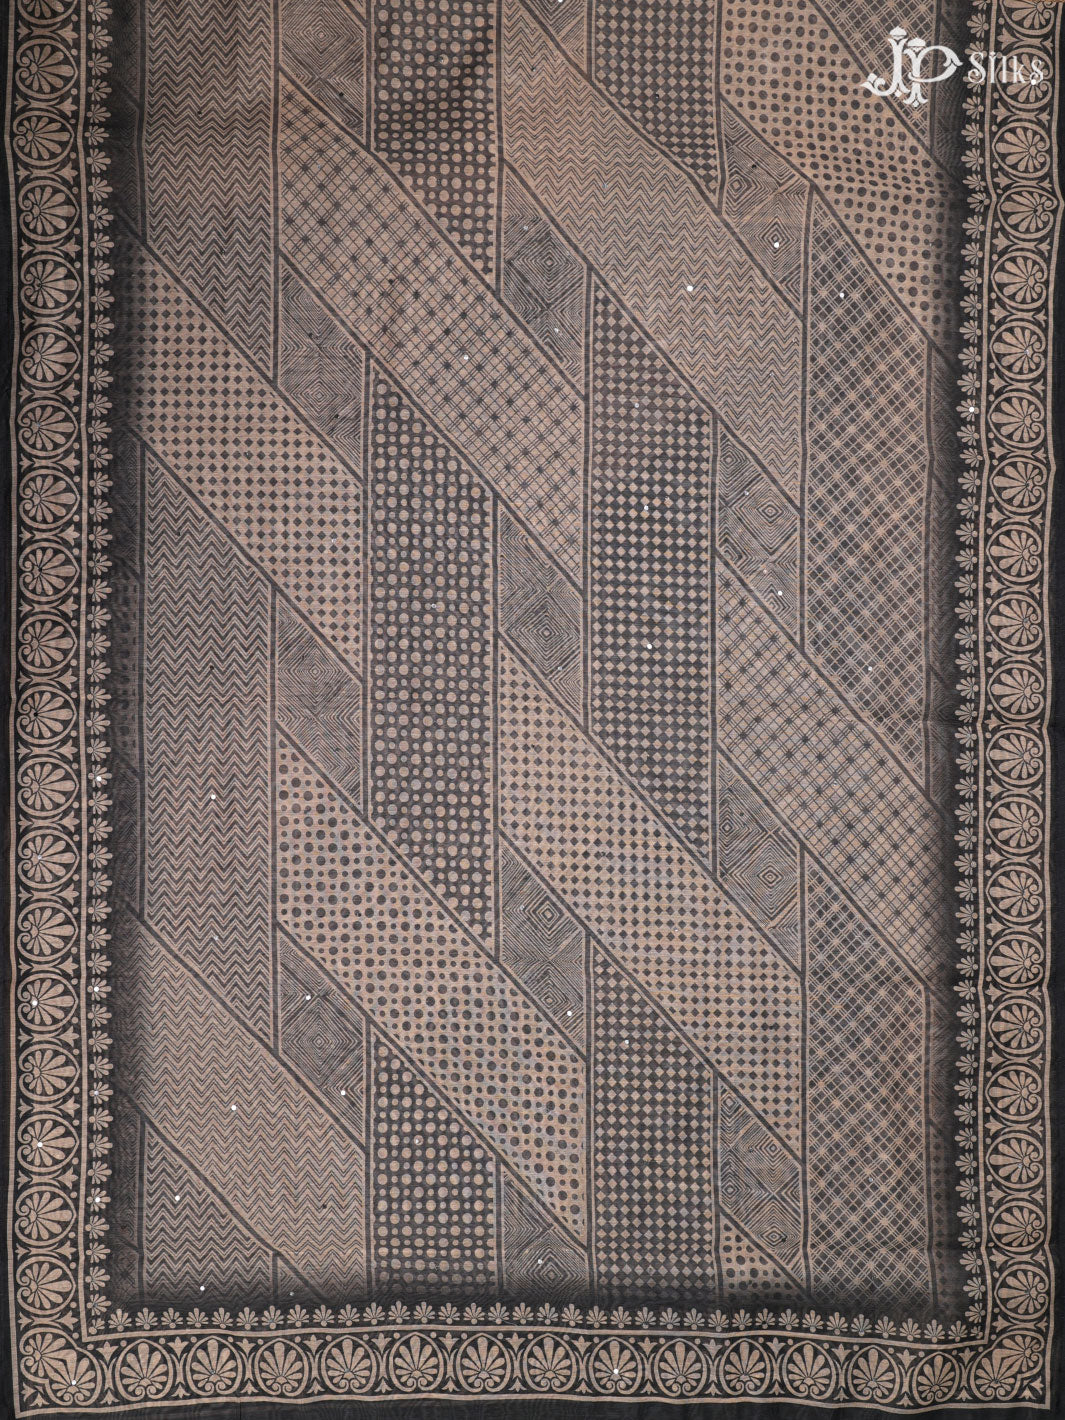 Grey Tussar Unstiched Chudidhar Material - E1457 - View 6